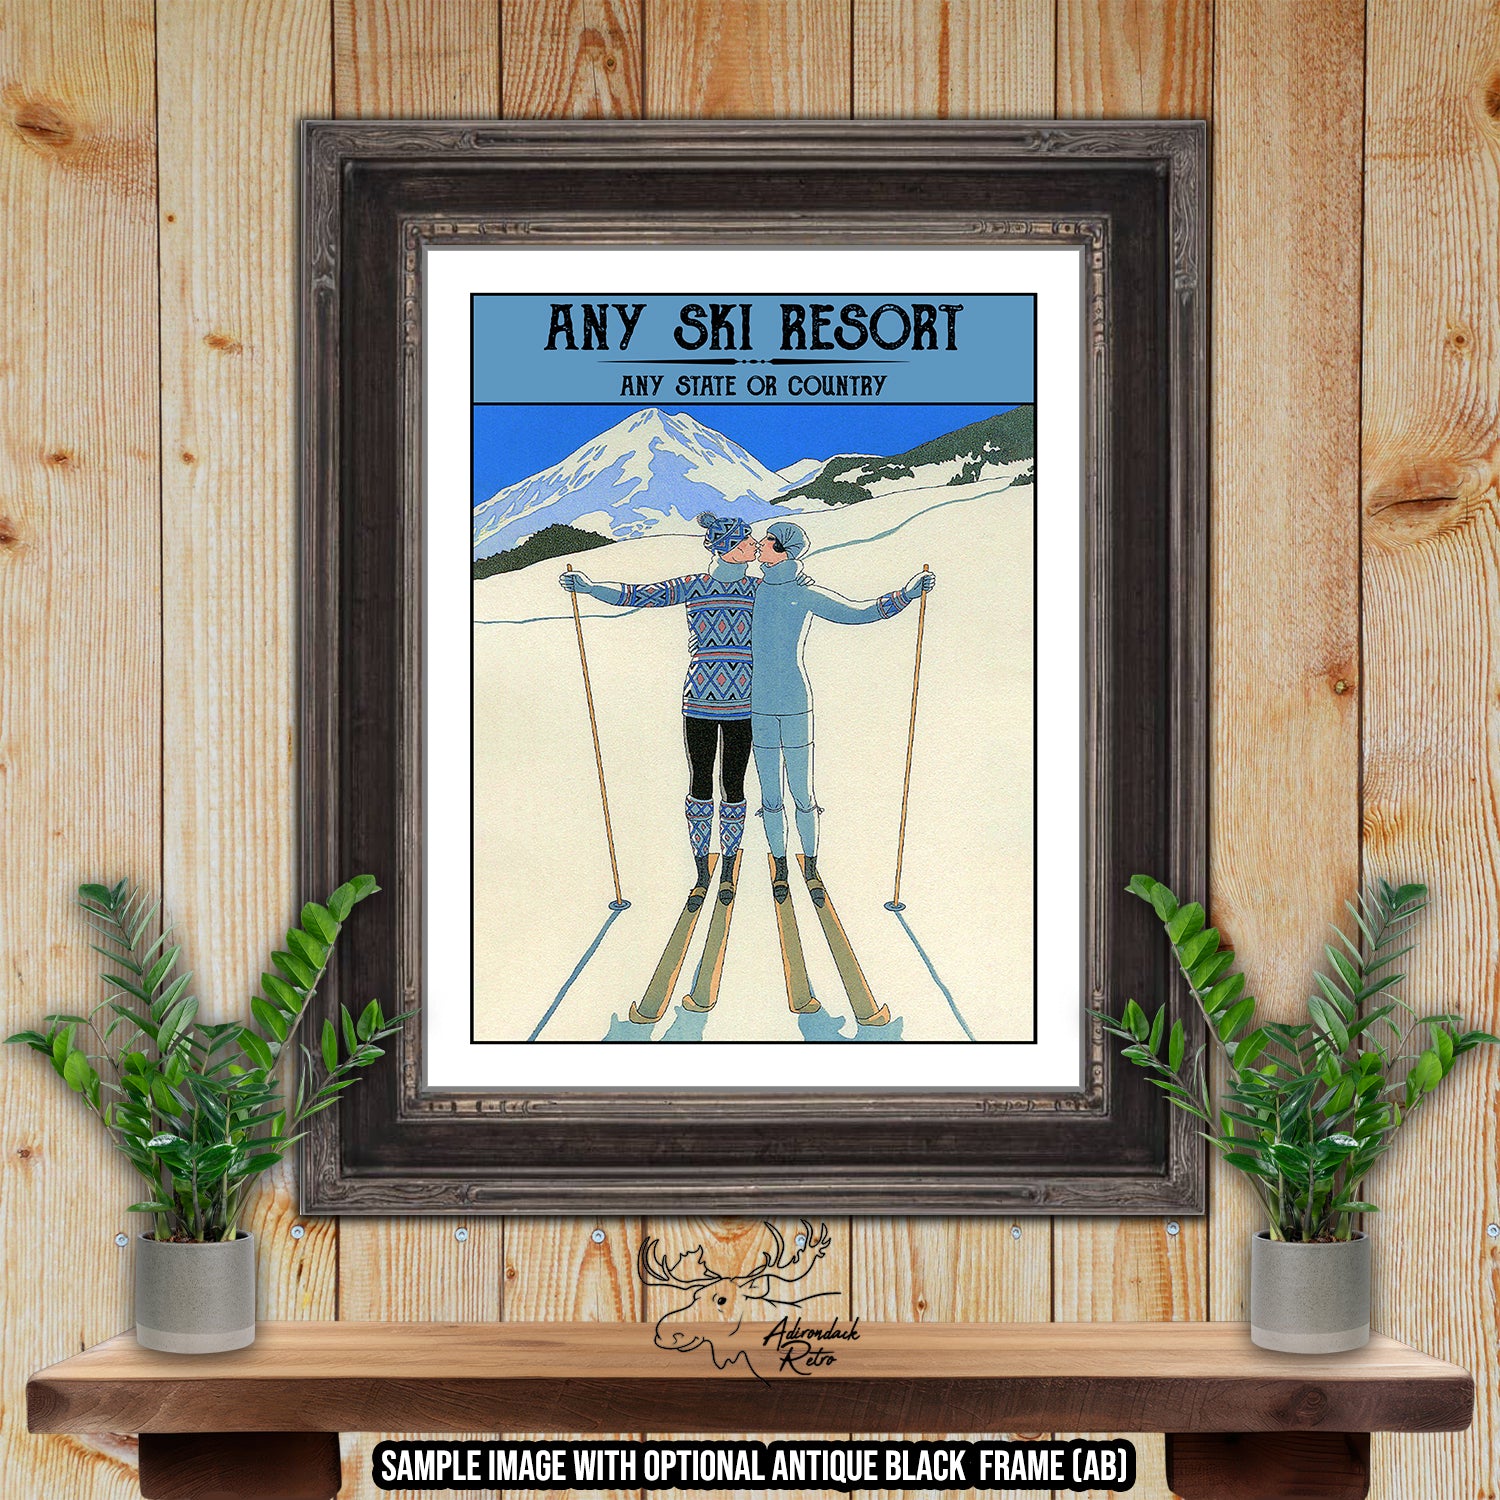 a picture of a man on skis in a frame